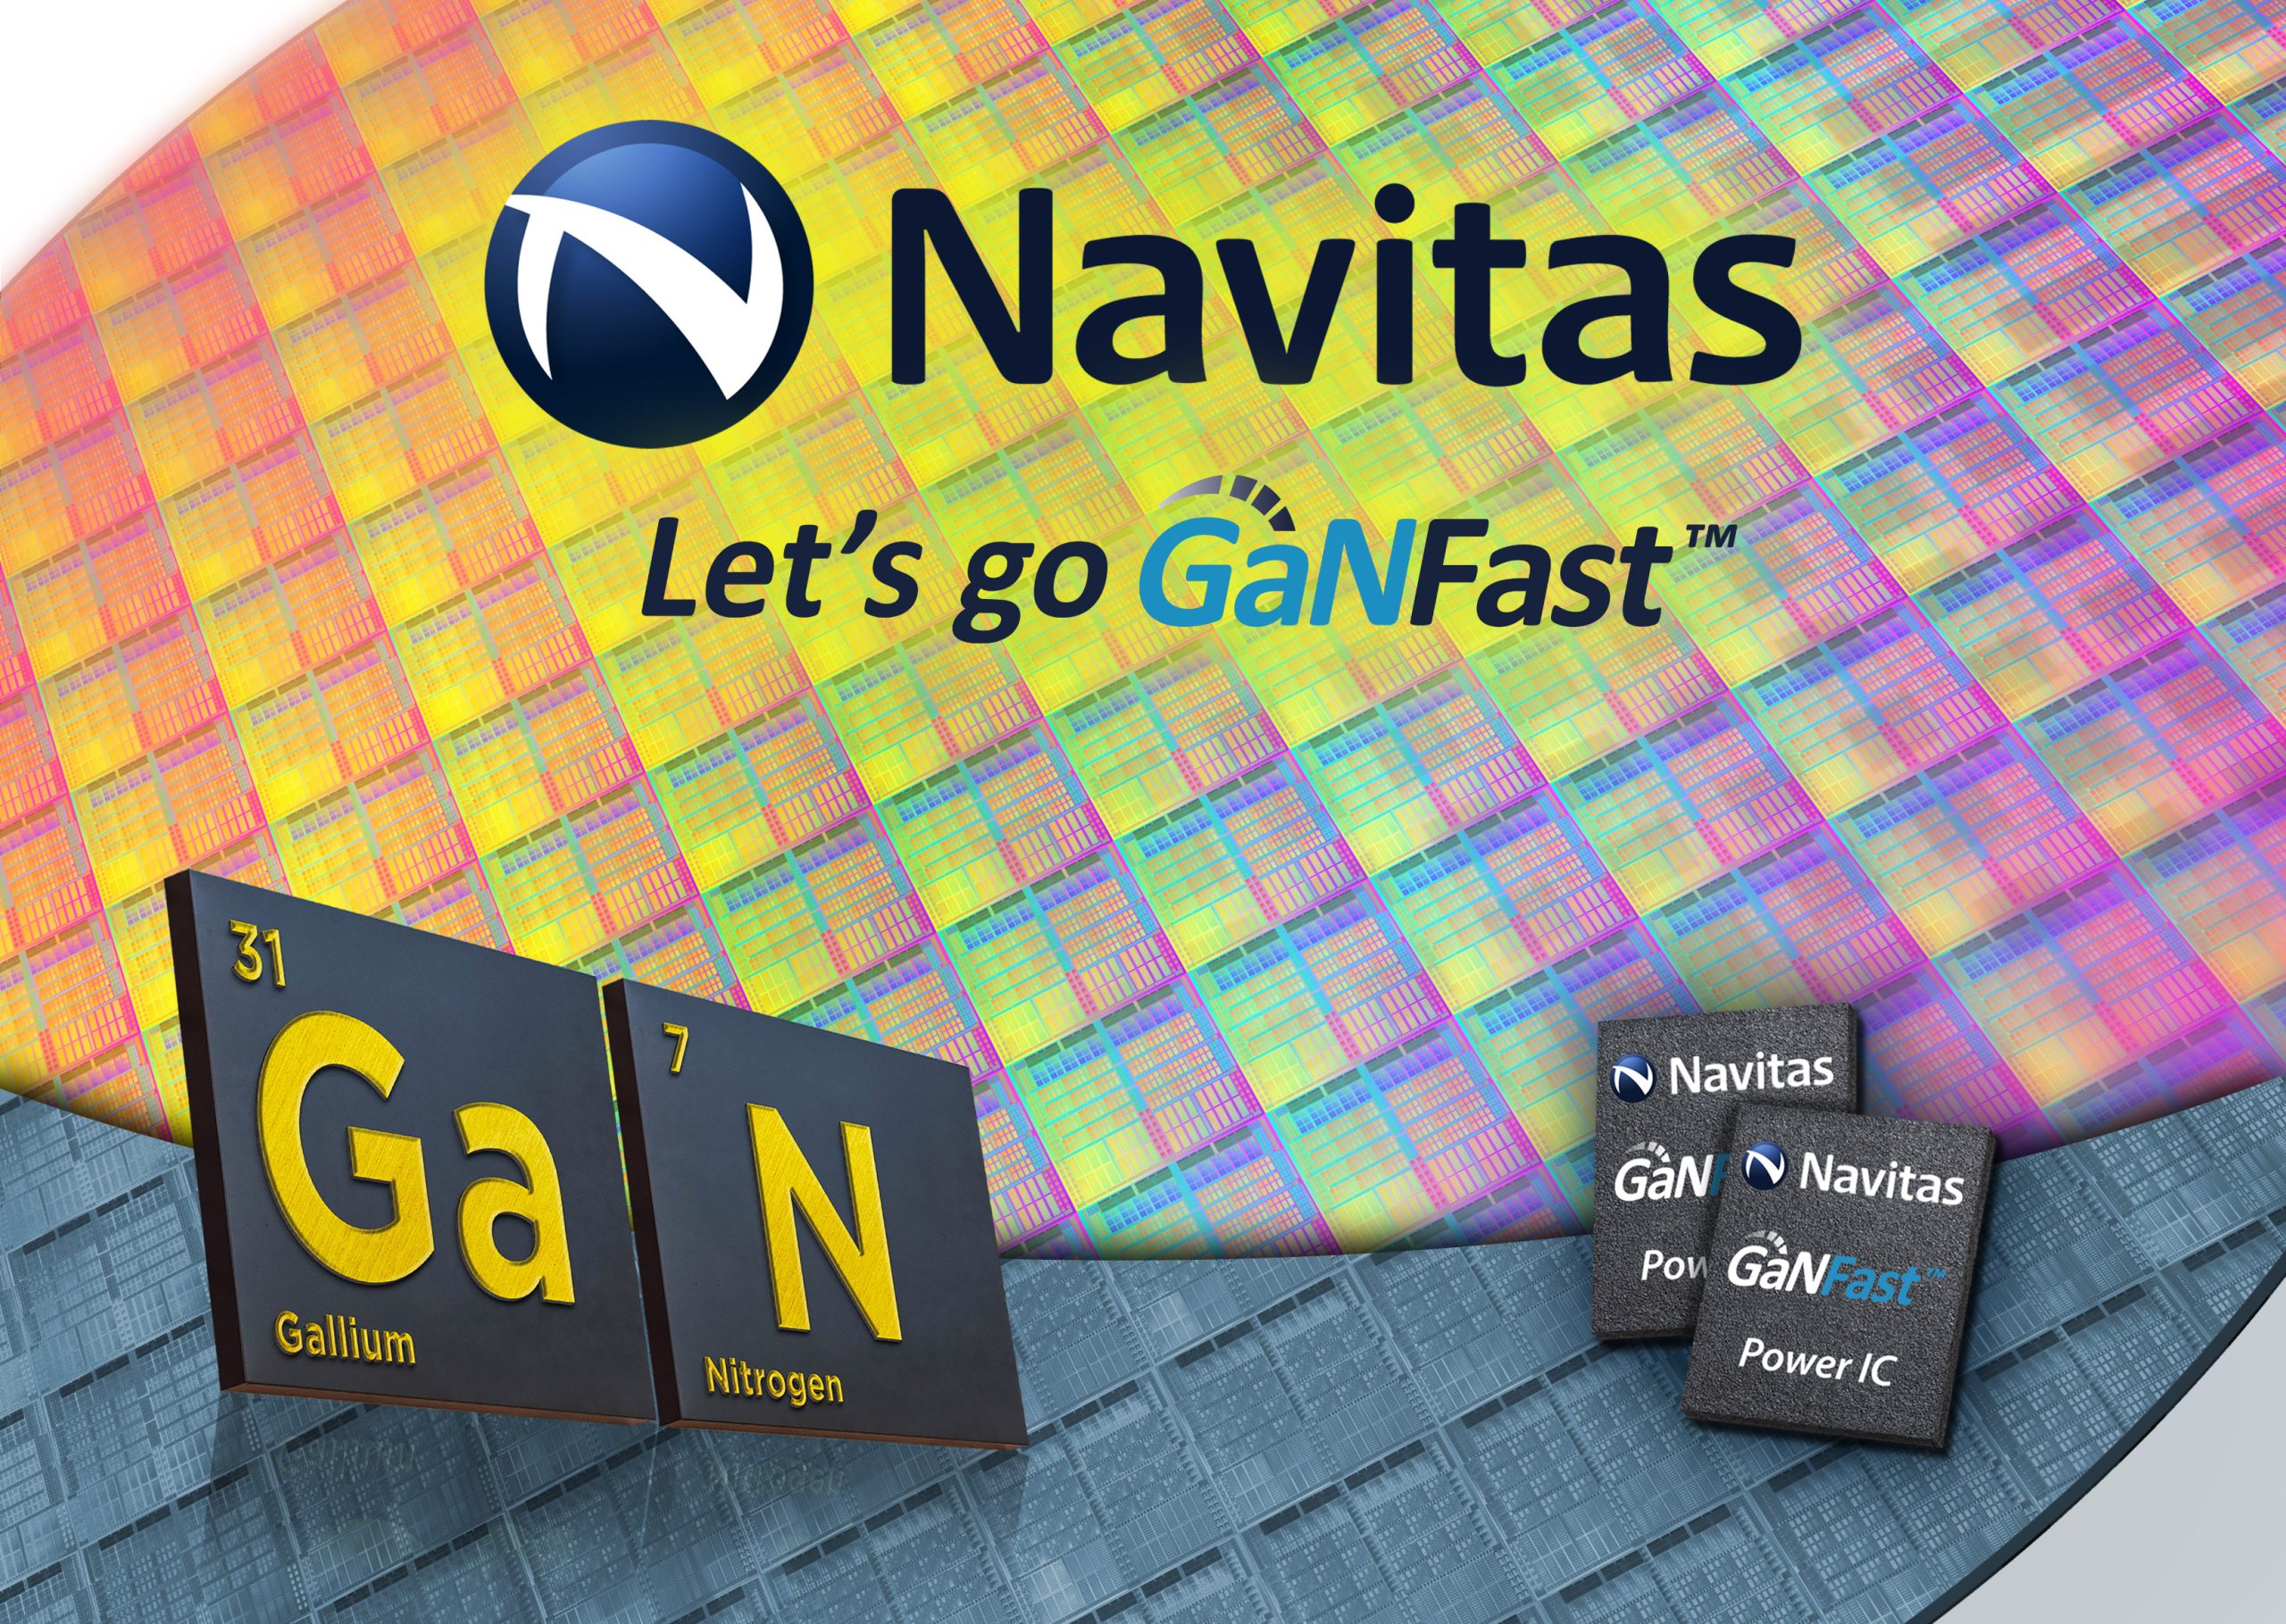 Navitas Ships 13,000,000 GaNFast Power ICs with World-Class Reliability